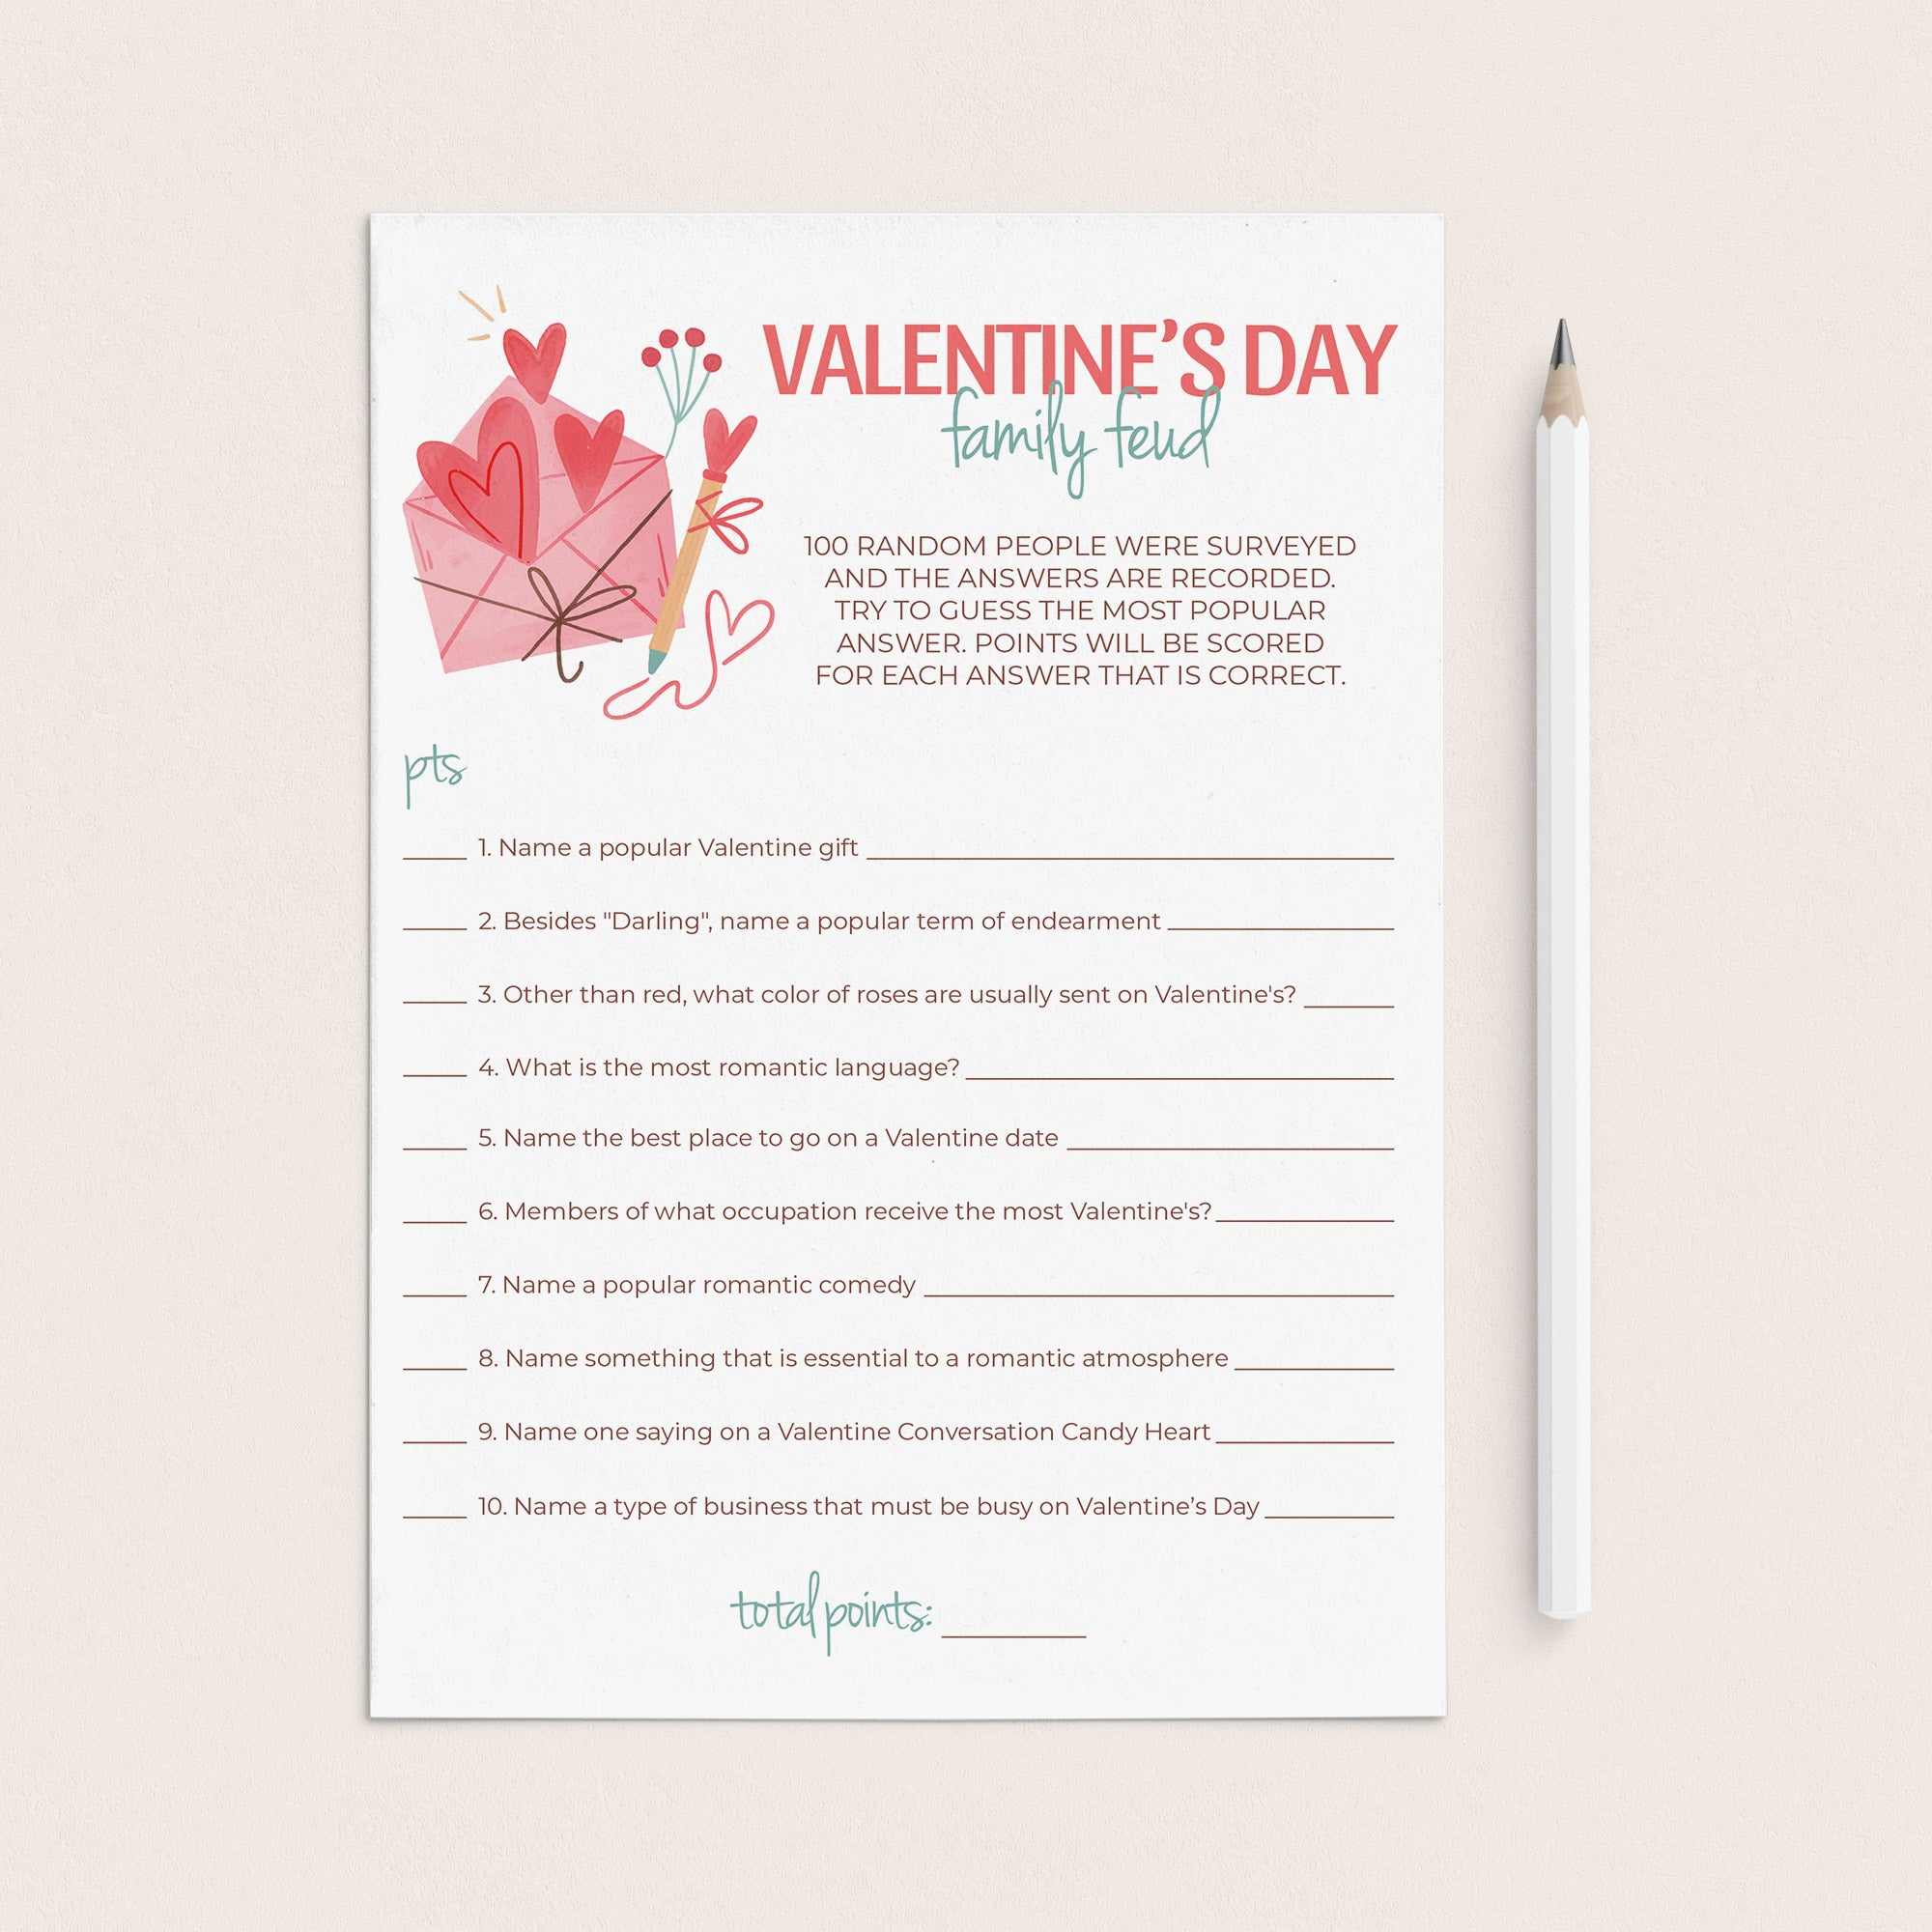 Valentine's Day Family Feud Questions and Answers Printable by LittleSizzle